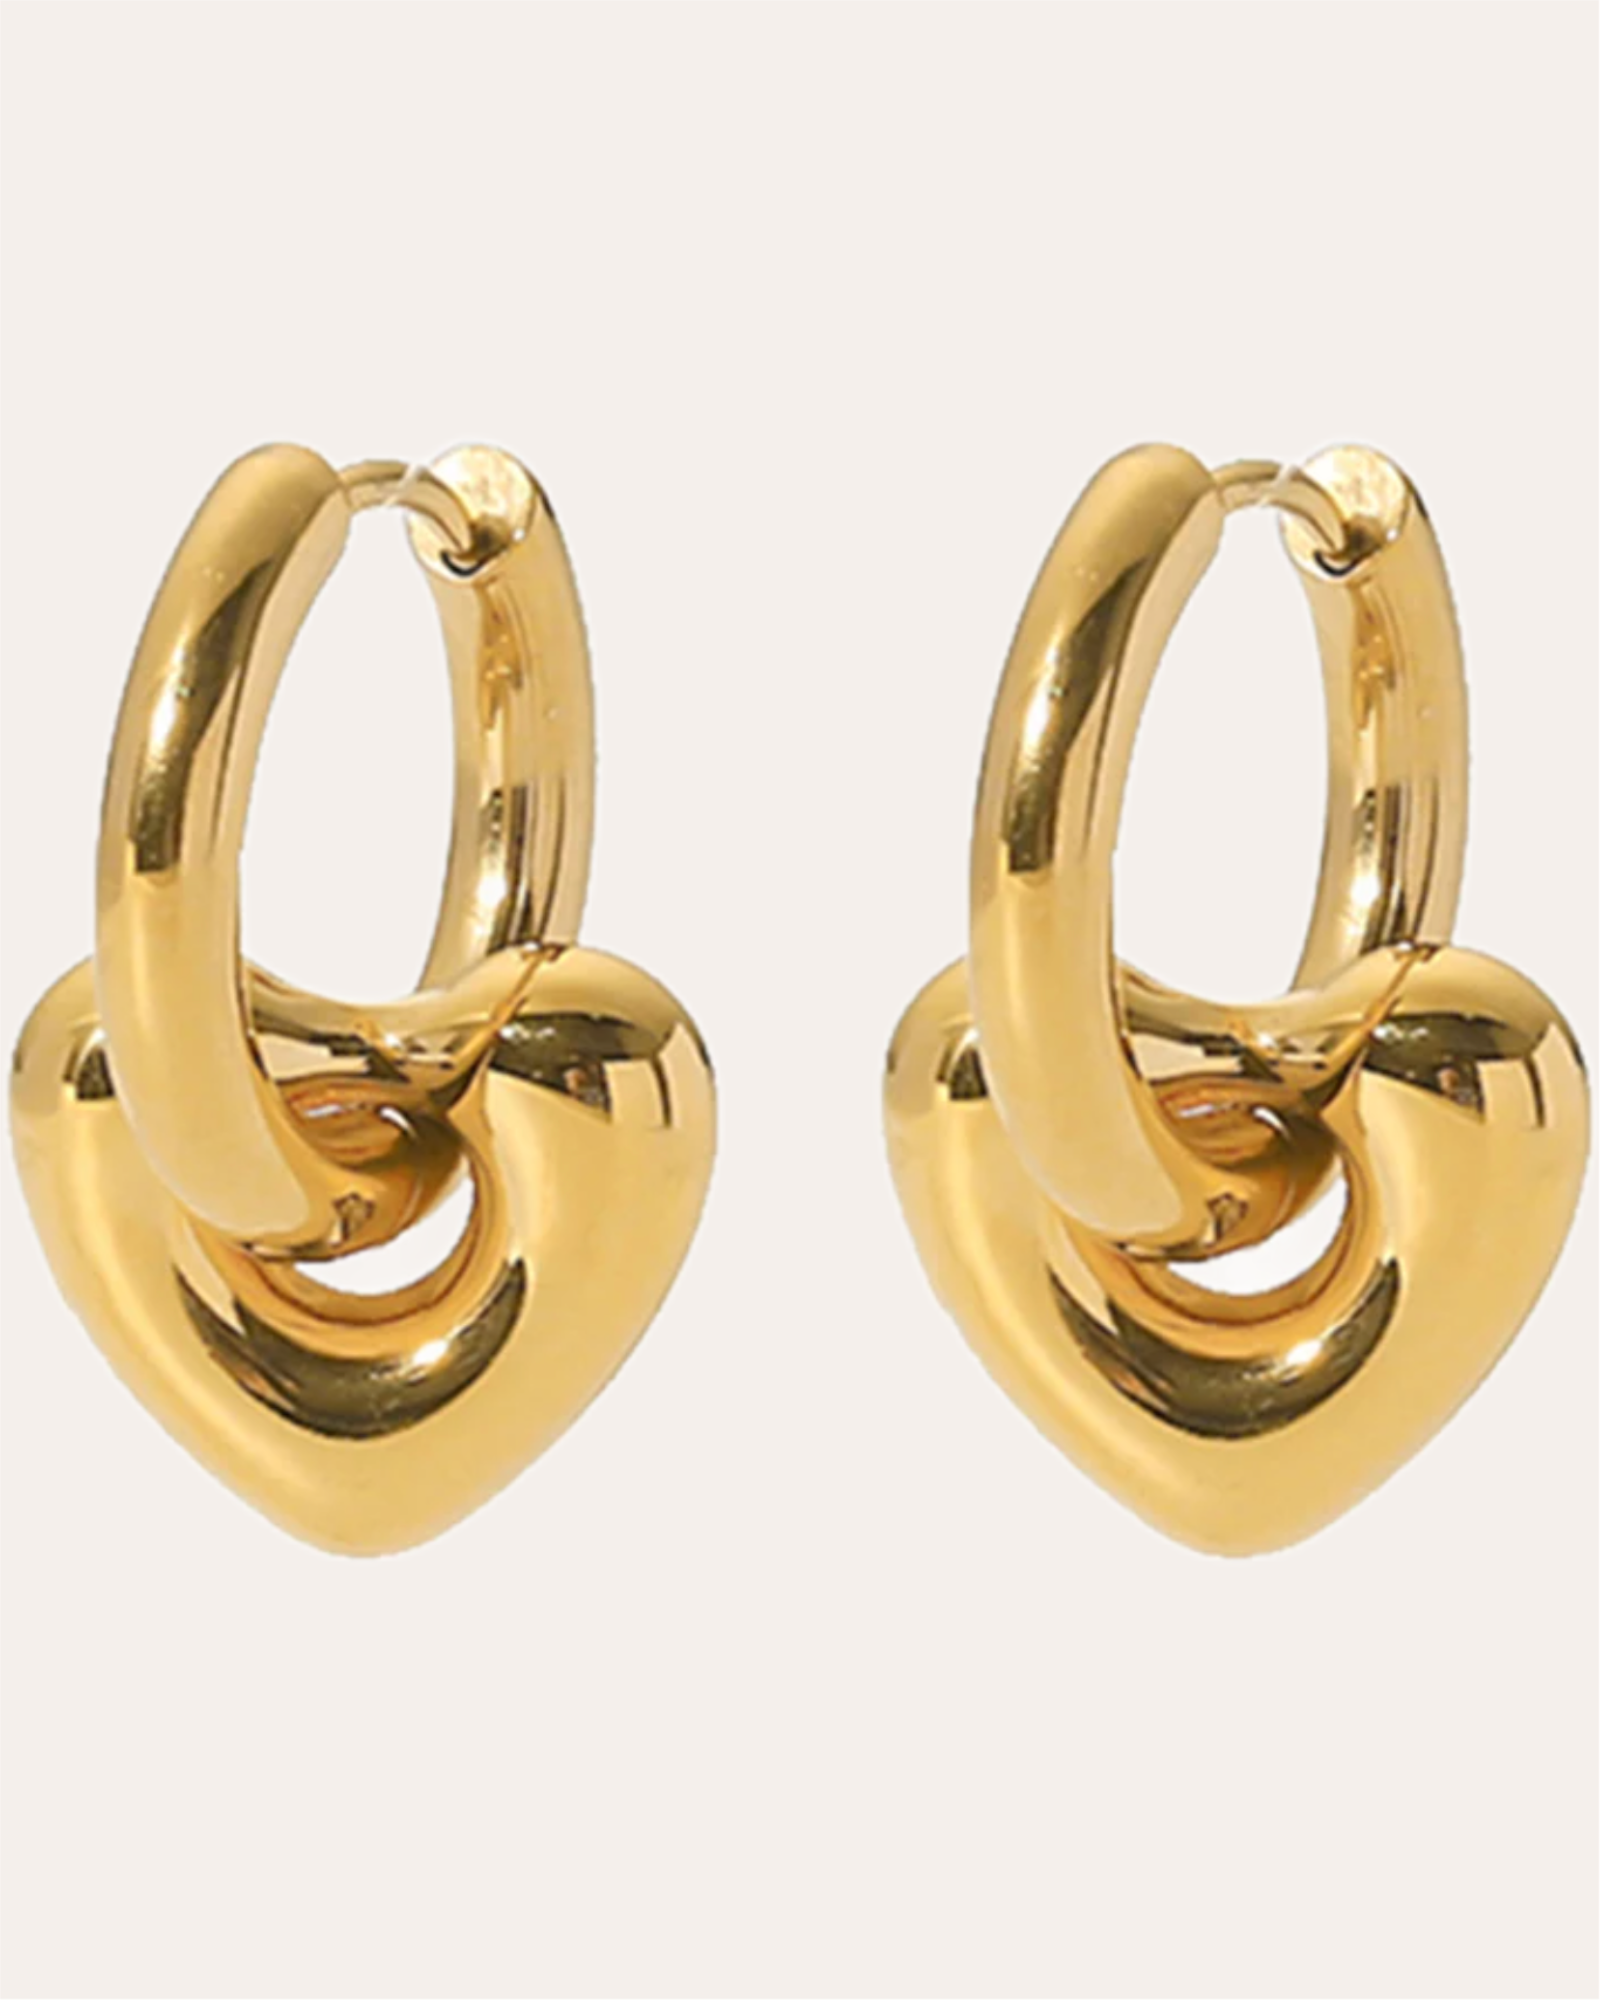 Heart-shaped huggie earrings with a smooth, shiny finish.